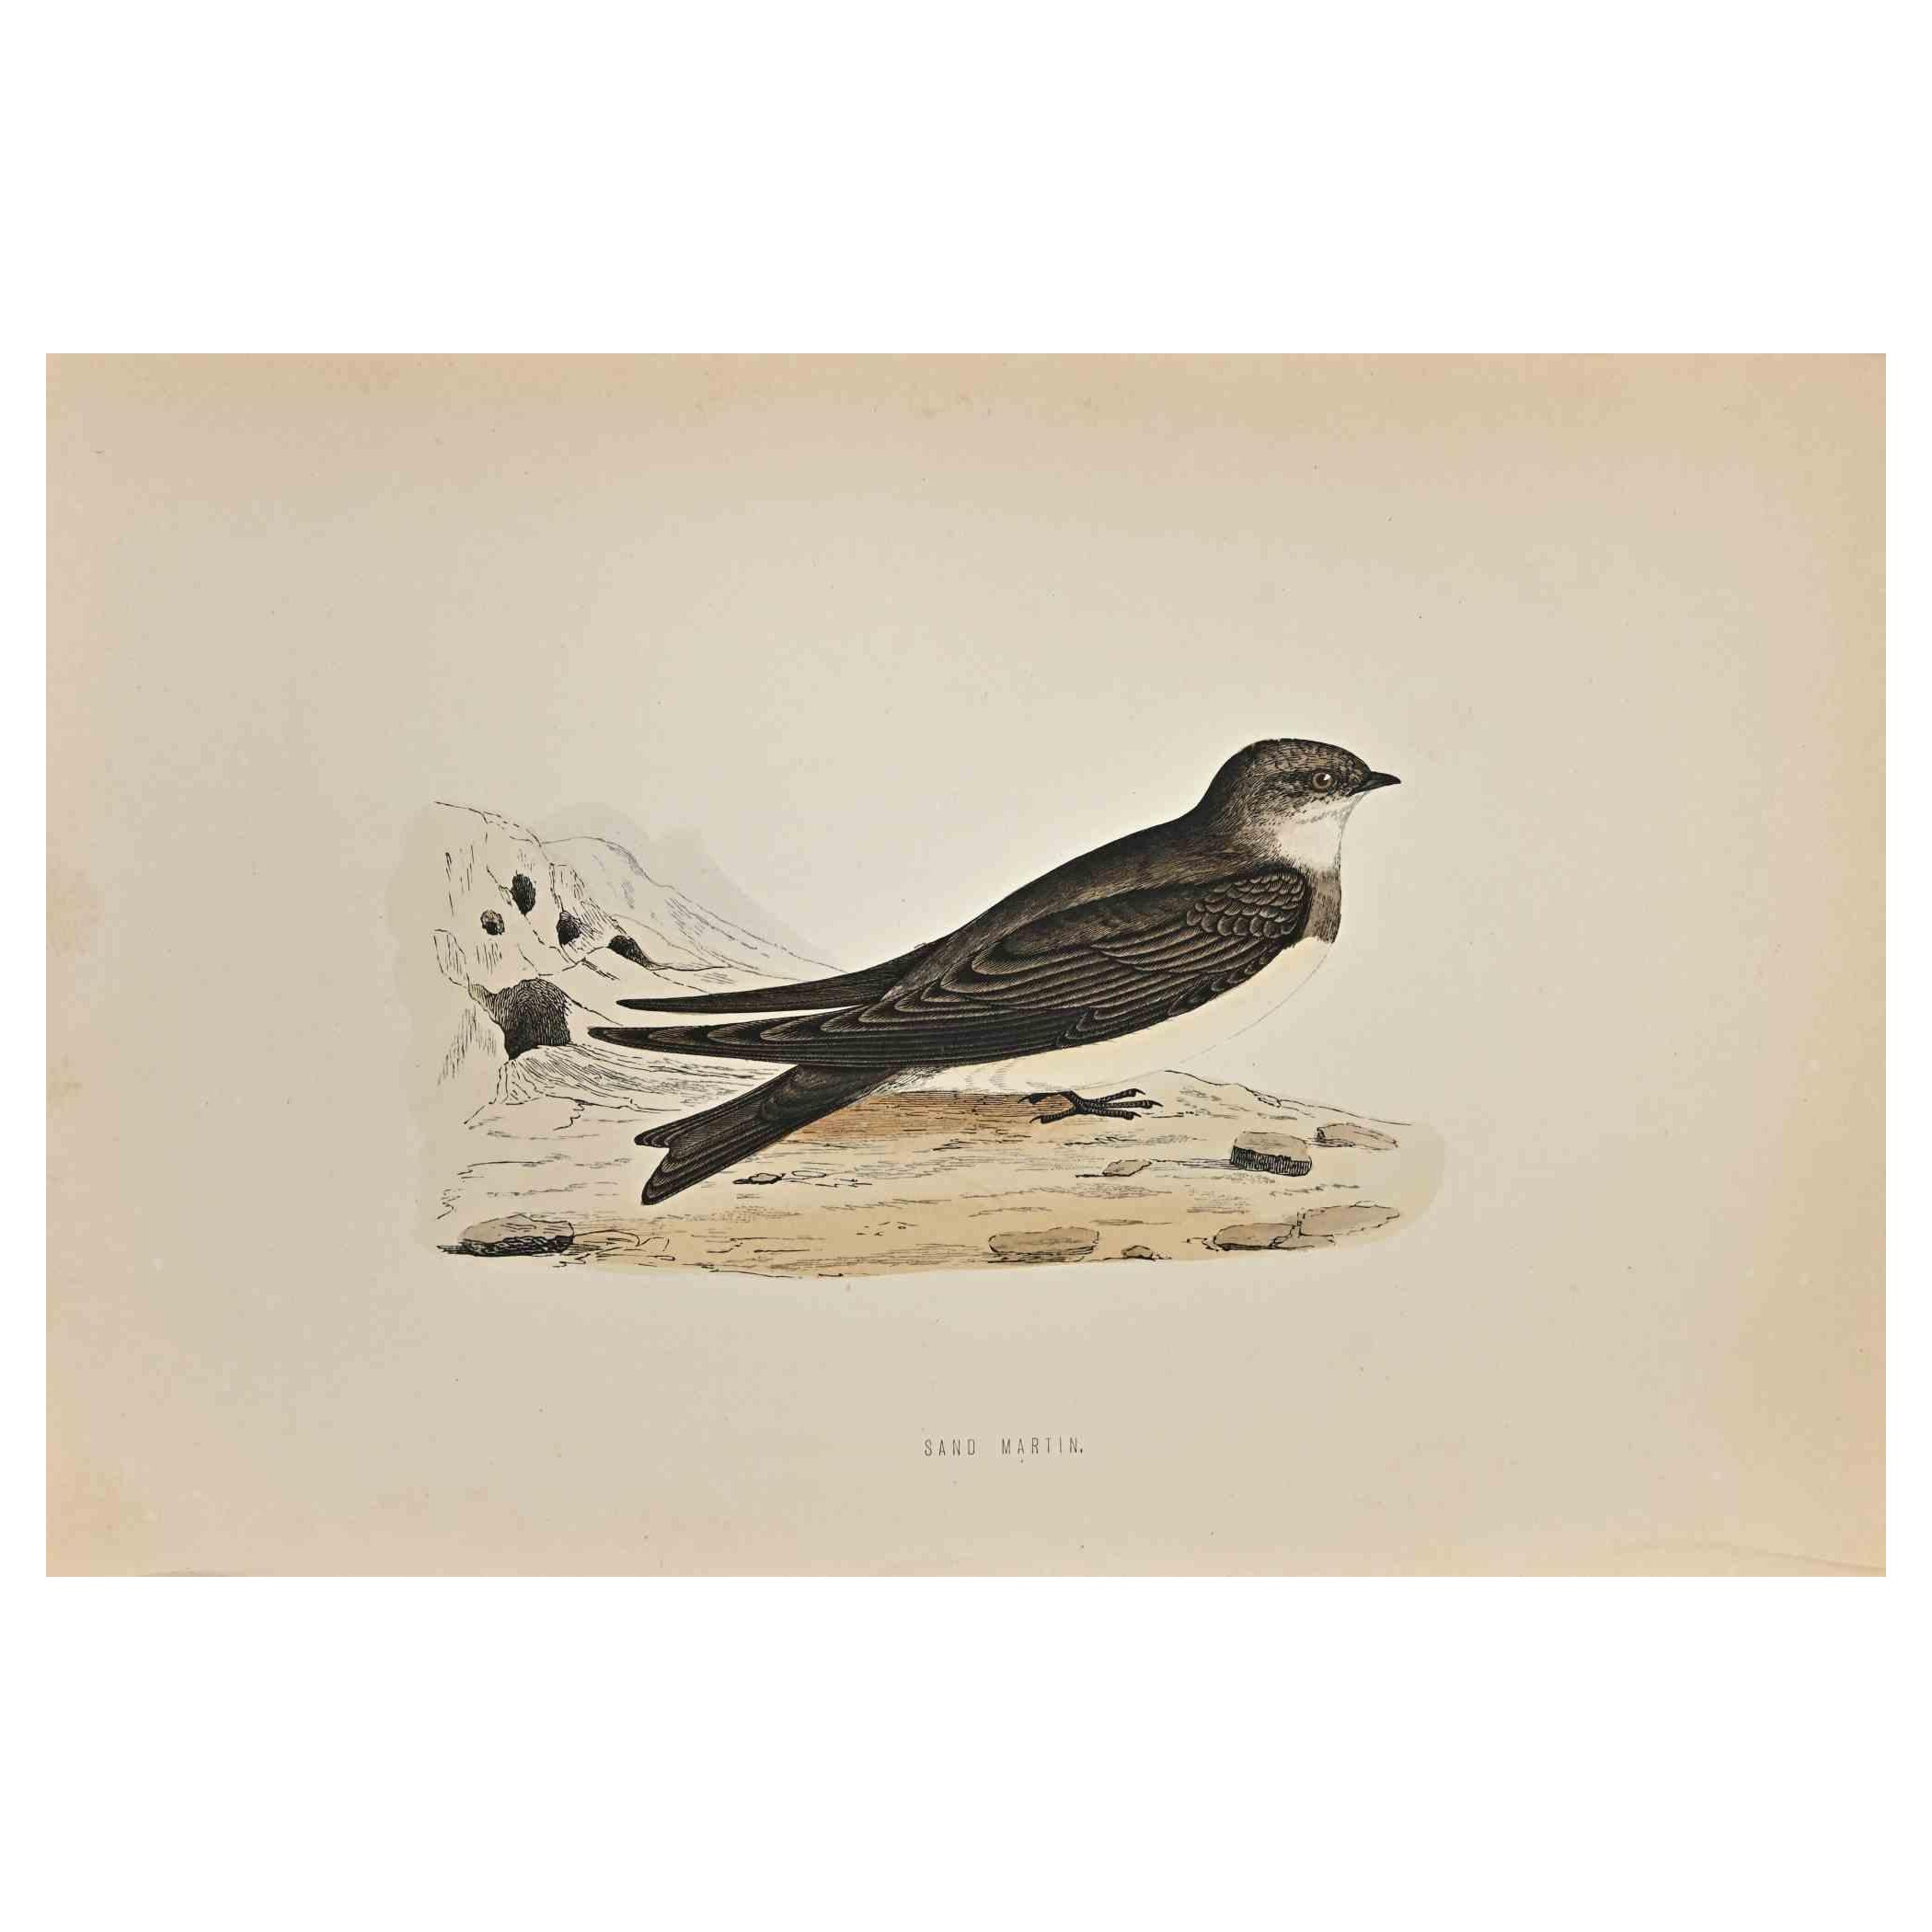 Sand Martin  is a modern artwork realized in 1870 by the British artist Alexander Francis Lydon (1836-1917) . 

Woodcut print, hand colored, published by London, Bell & Sons, 1870.  Name of the bird printed in plate. This work is part of a print